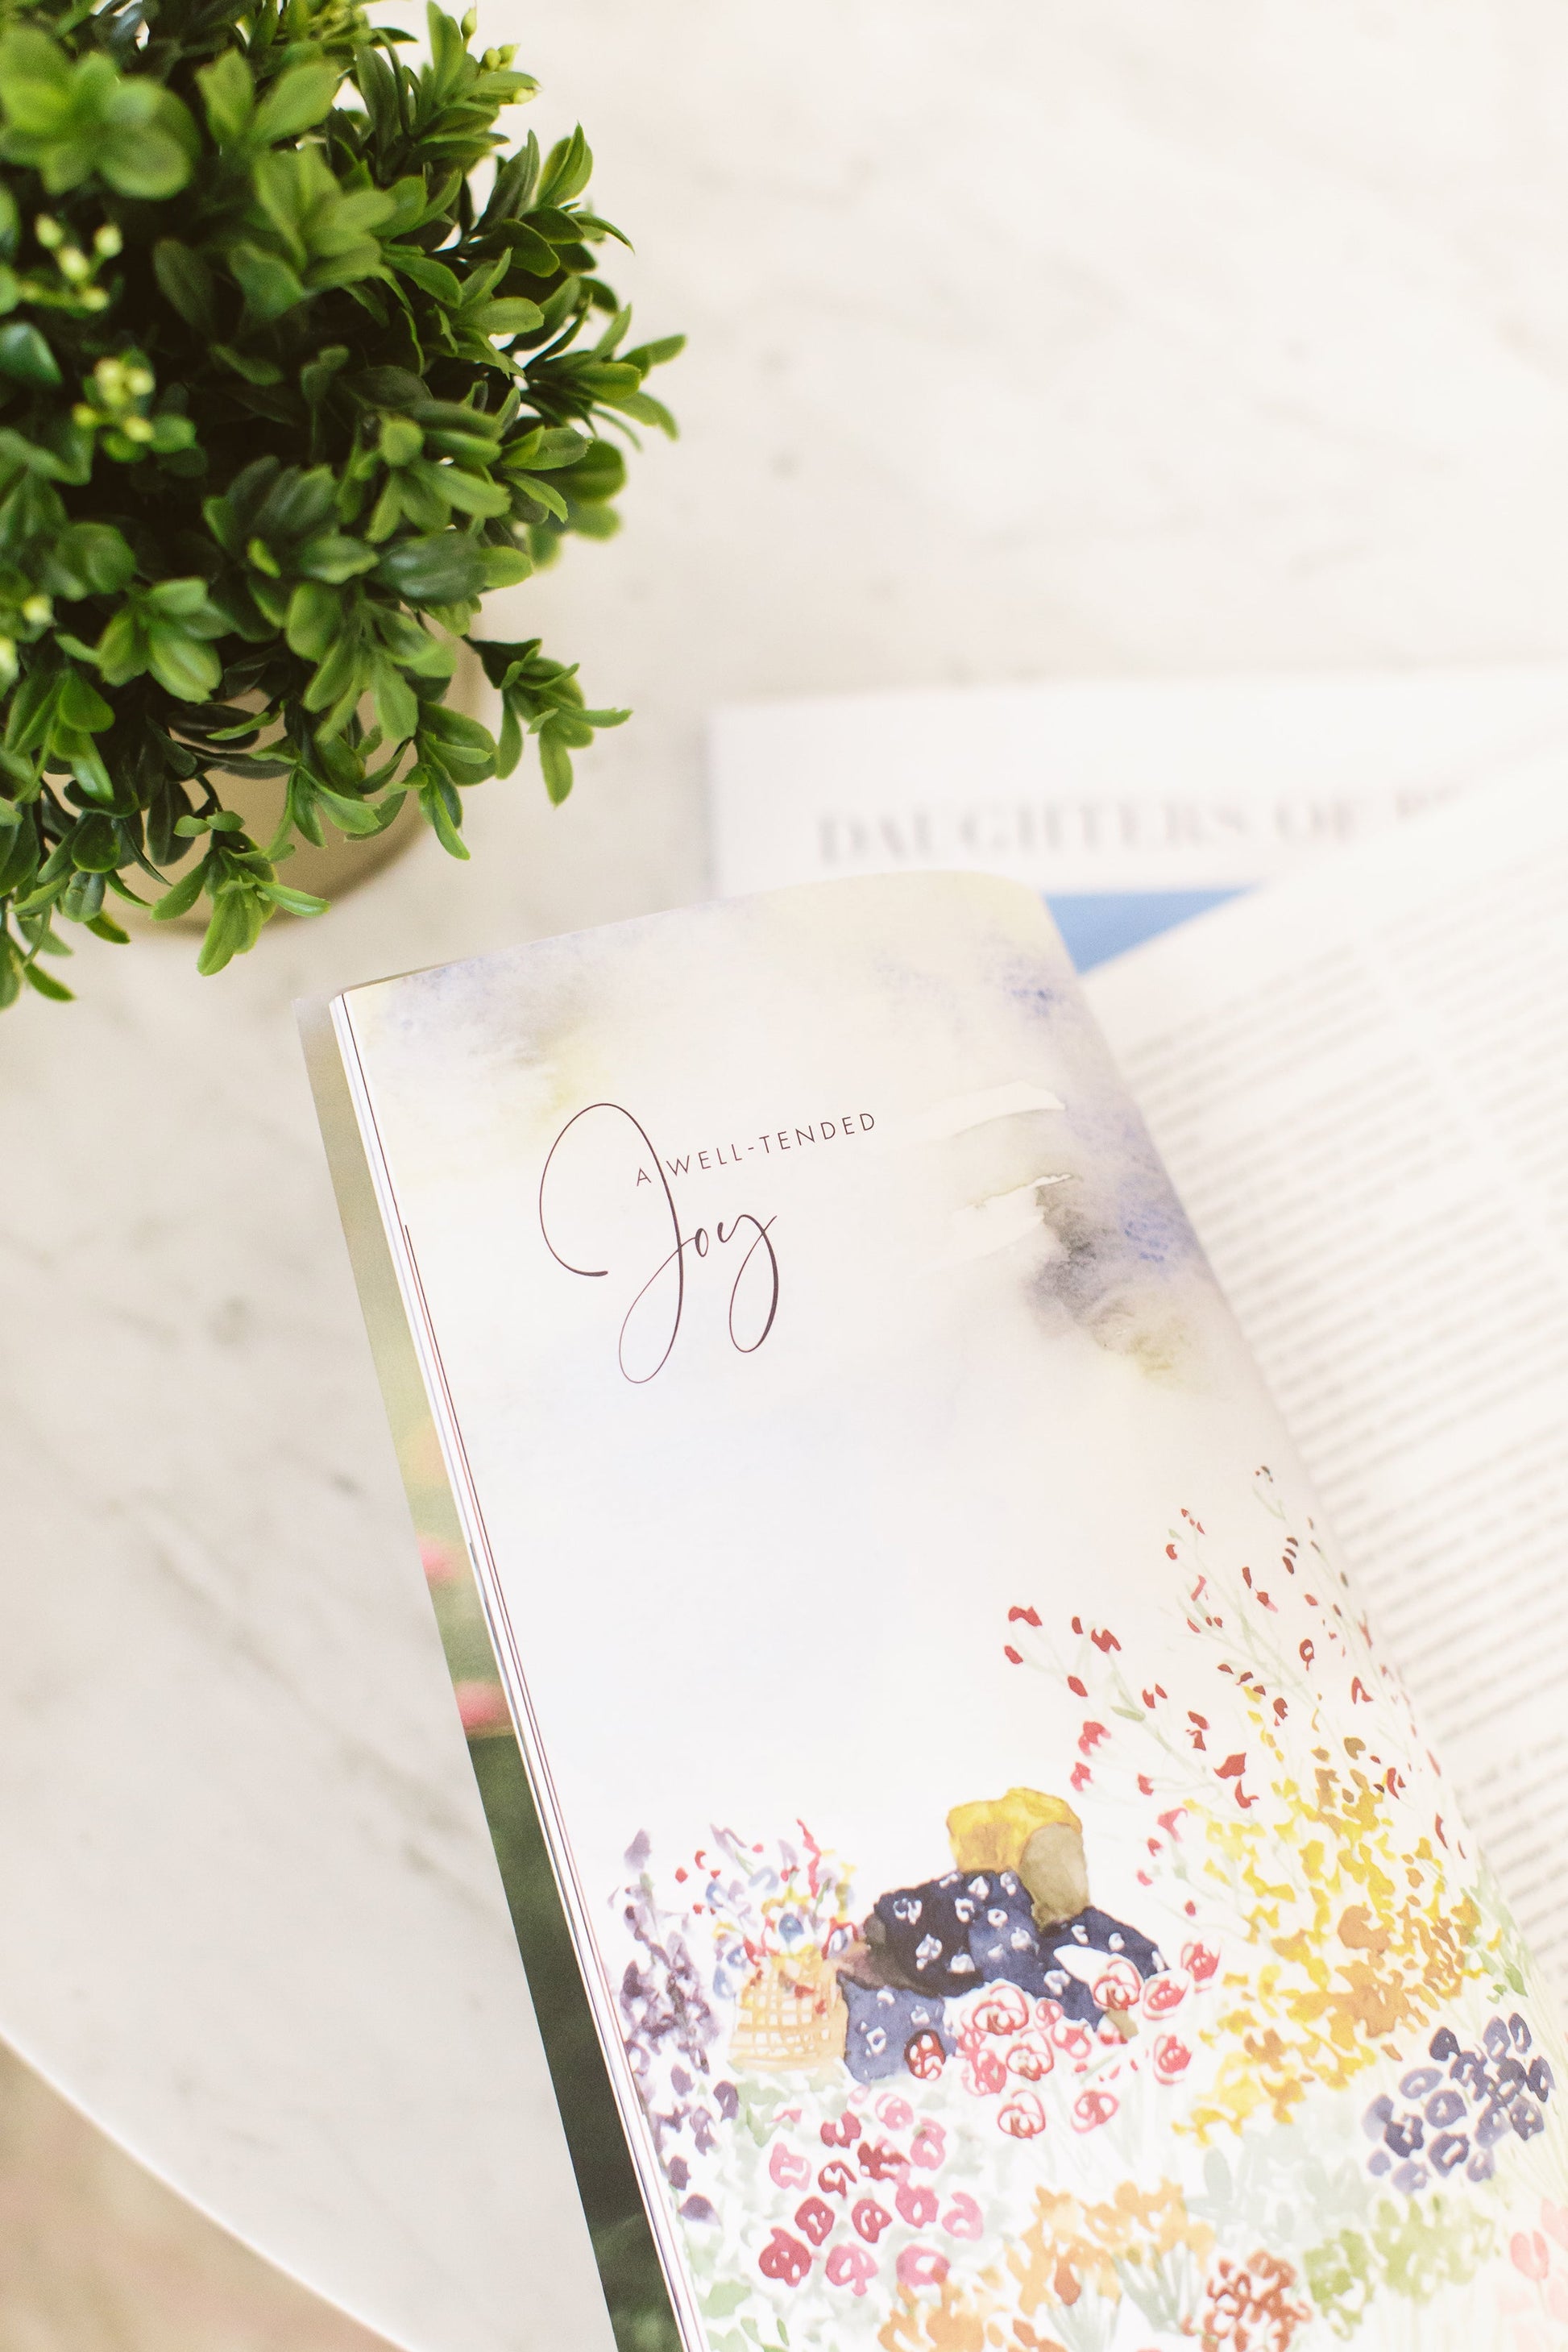 Daughters of Promise Christian Magazine